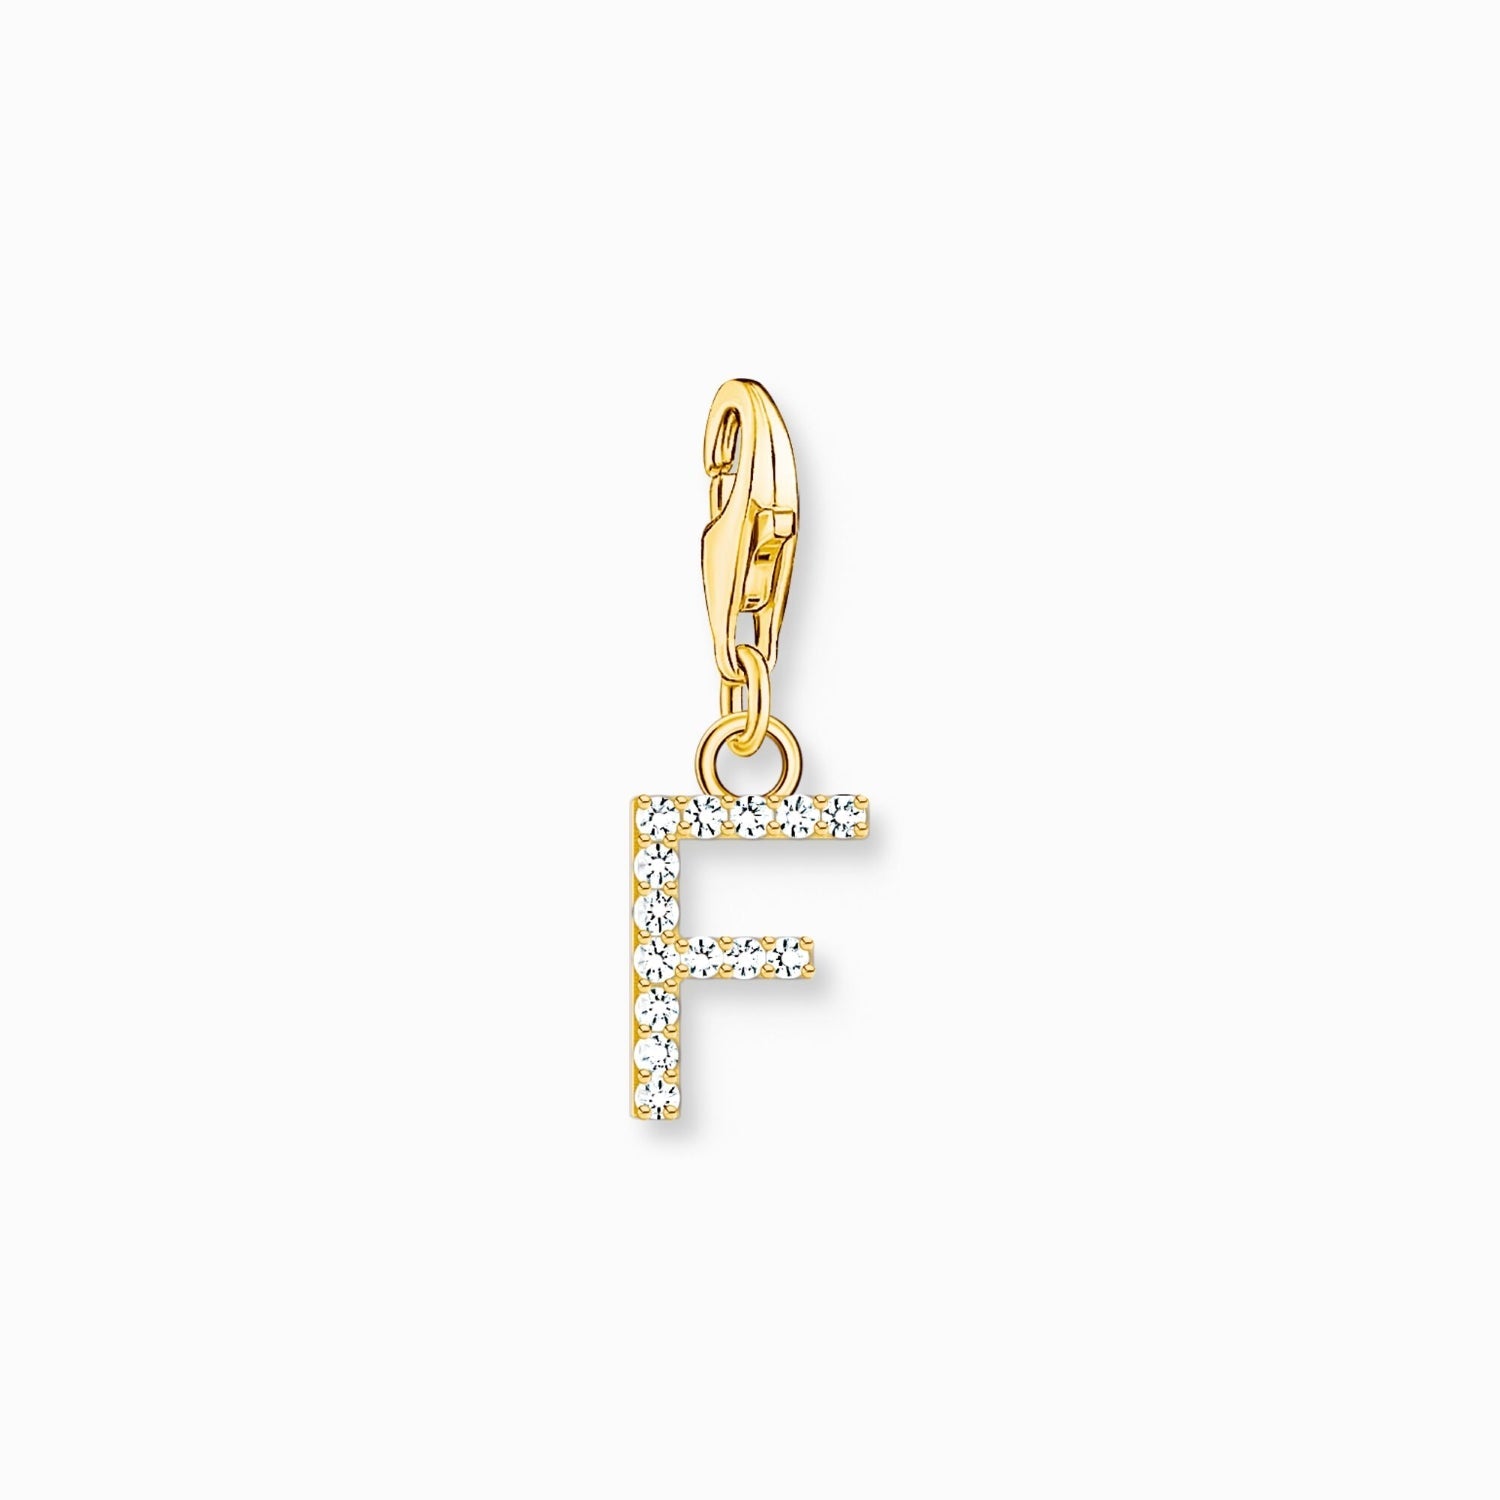 Thomas Sabo Charmista Gold Plated Sterling Silver Letter F Charm Pendant